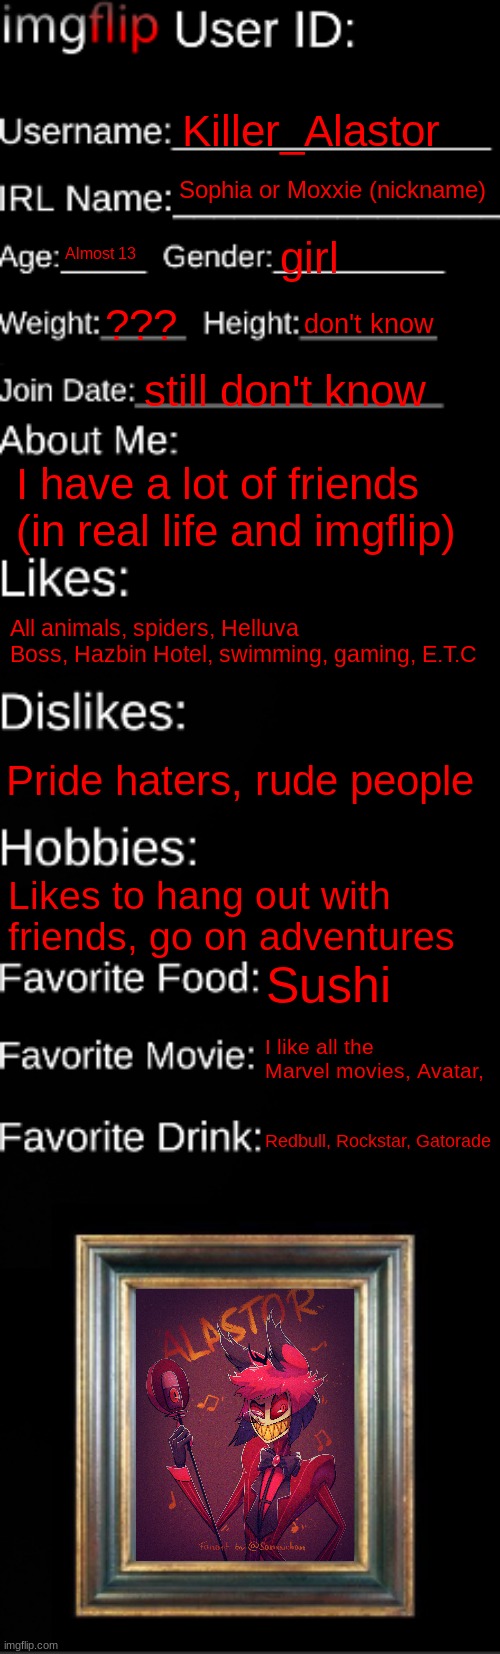 imgflip ID Card | Killer_Alastor; Sophia or Moxxie (nickname); Almost 13; girl; ??? don't know; still don't know; I have a lot of friends (in real life and imgflip); All animals, spiders, Helluva Boss, Hazbin Hotel, swimming, gaming, E.T.C; Pride haters, rude people; Likes to hang out with friends, go on adventures; Sushi; I like all the Marvel movies, Avatar, Redbull, Rockstar, Gatorade | image tagged in imgflip id card | made w/ Imgflip meme maker